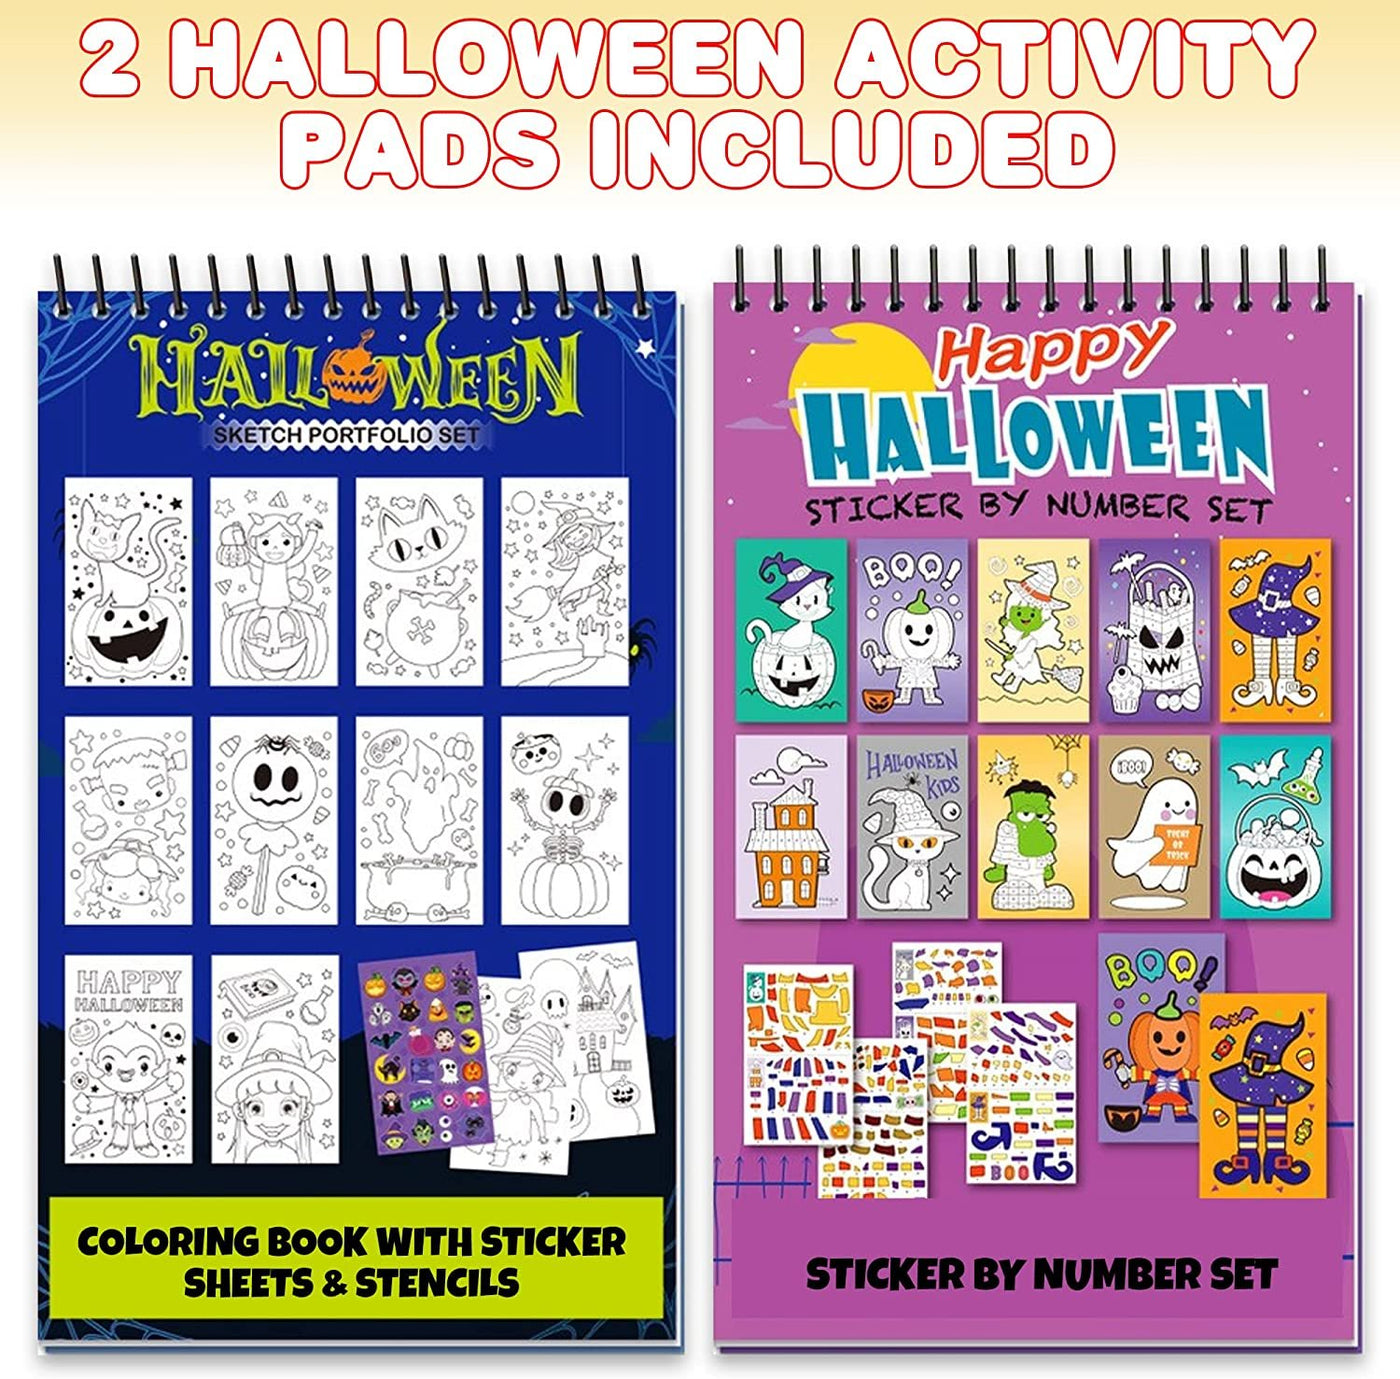 ArtCreativity Halloween Activity Books, Set of 2, Includes 1 Coloring Book with a Sticker Sheet and 1 Sticker by Number Book with 5 Sticker Sheets, Great as Halloween Party Favors and Treats